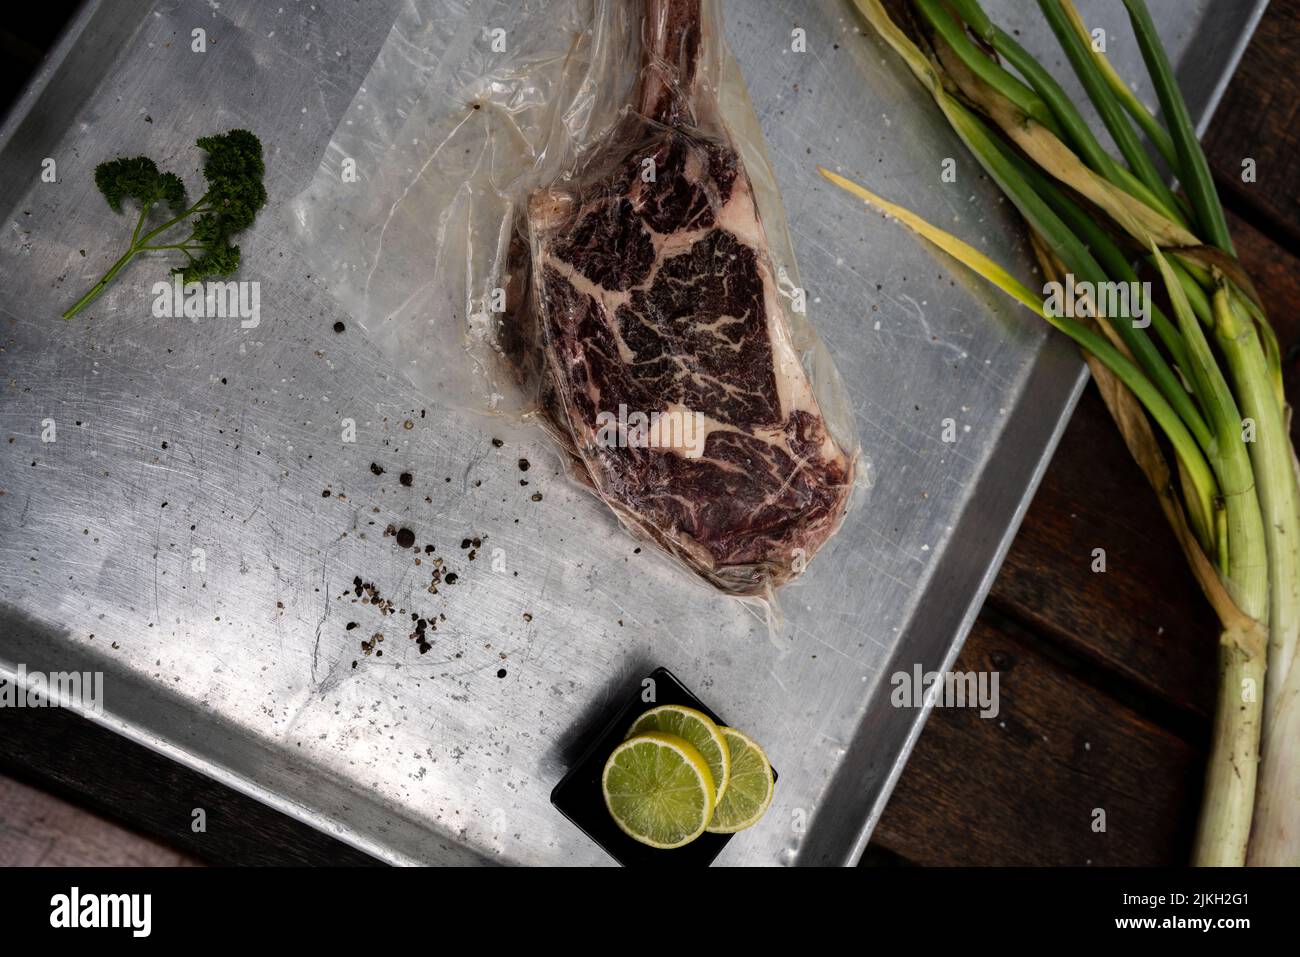 A top view of a raw slice of steak on a silver board with herbs and lemon slices Stock Photo